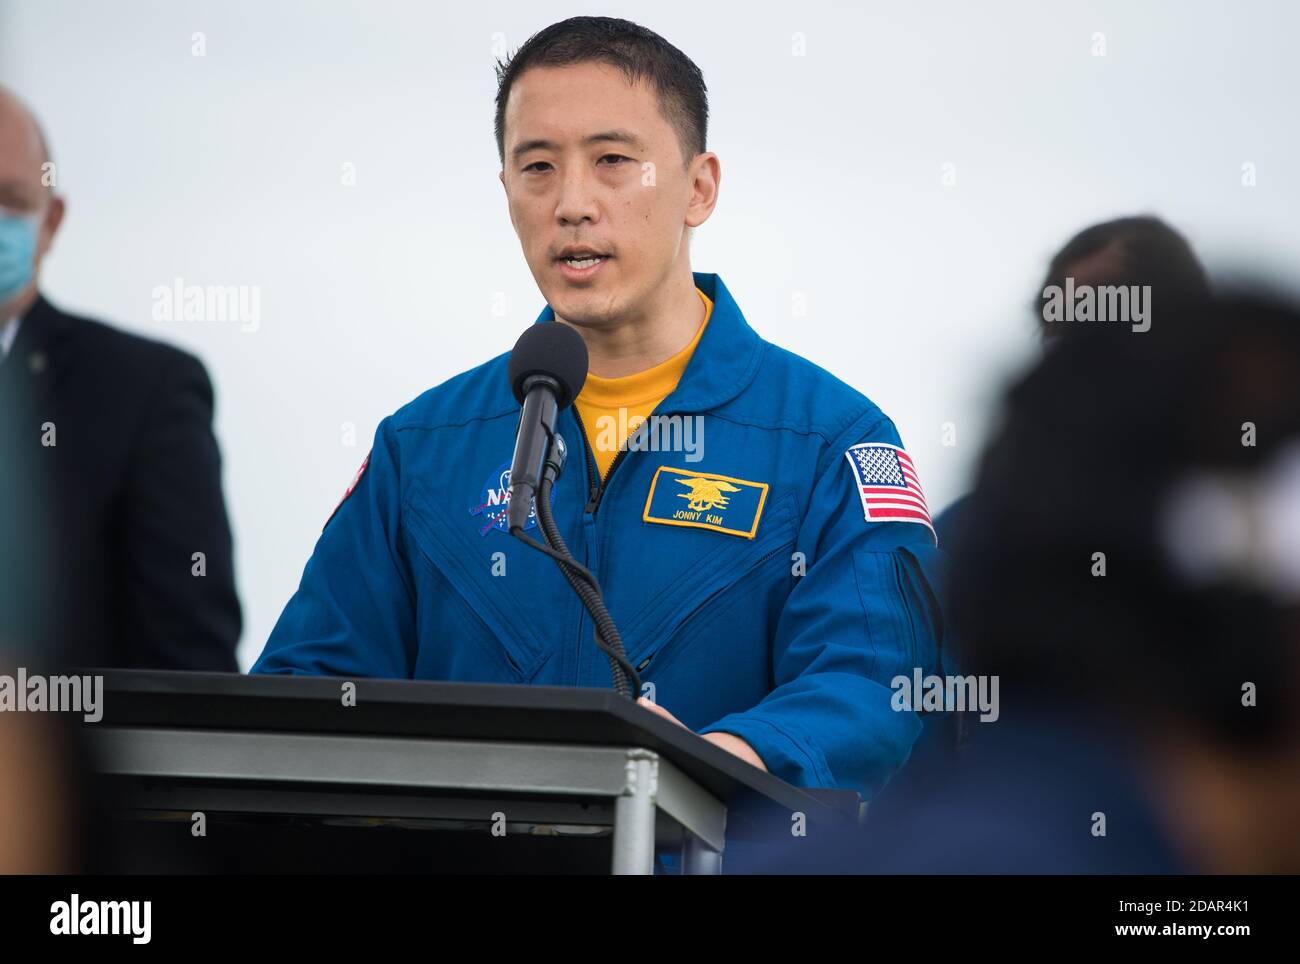 NASA backup astronaut Jonny Kim speaks to members of the media at the Kennedy Space Center November 13, 2020 in Cape Canaveral, Florida. Stock Photo